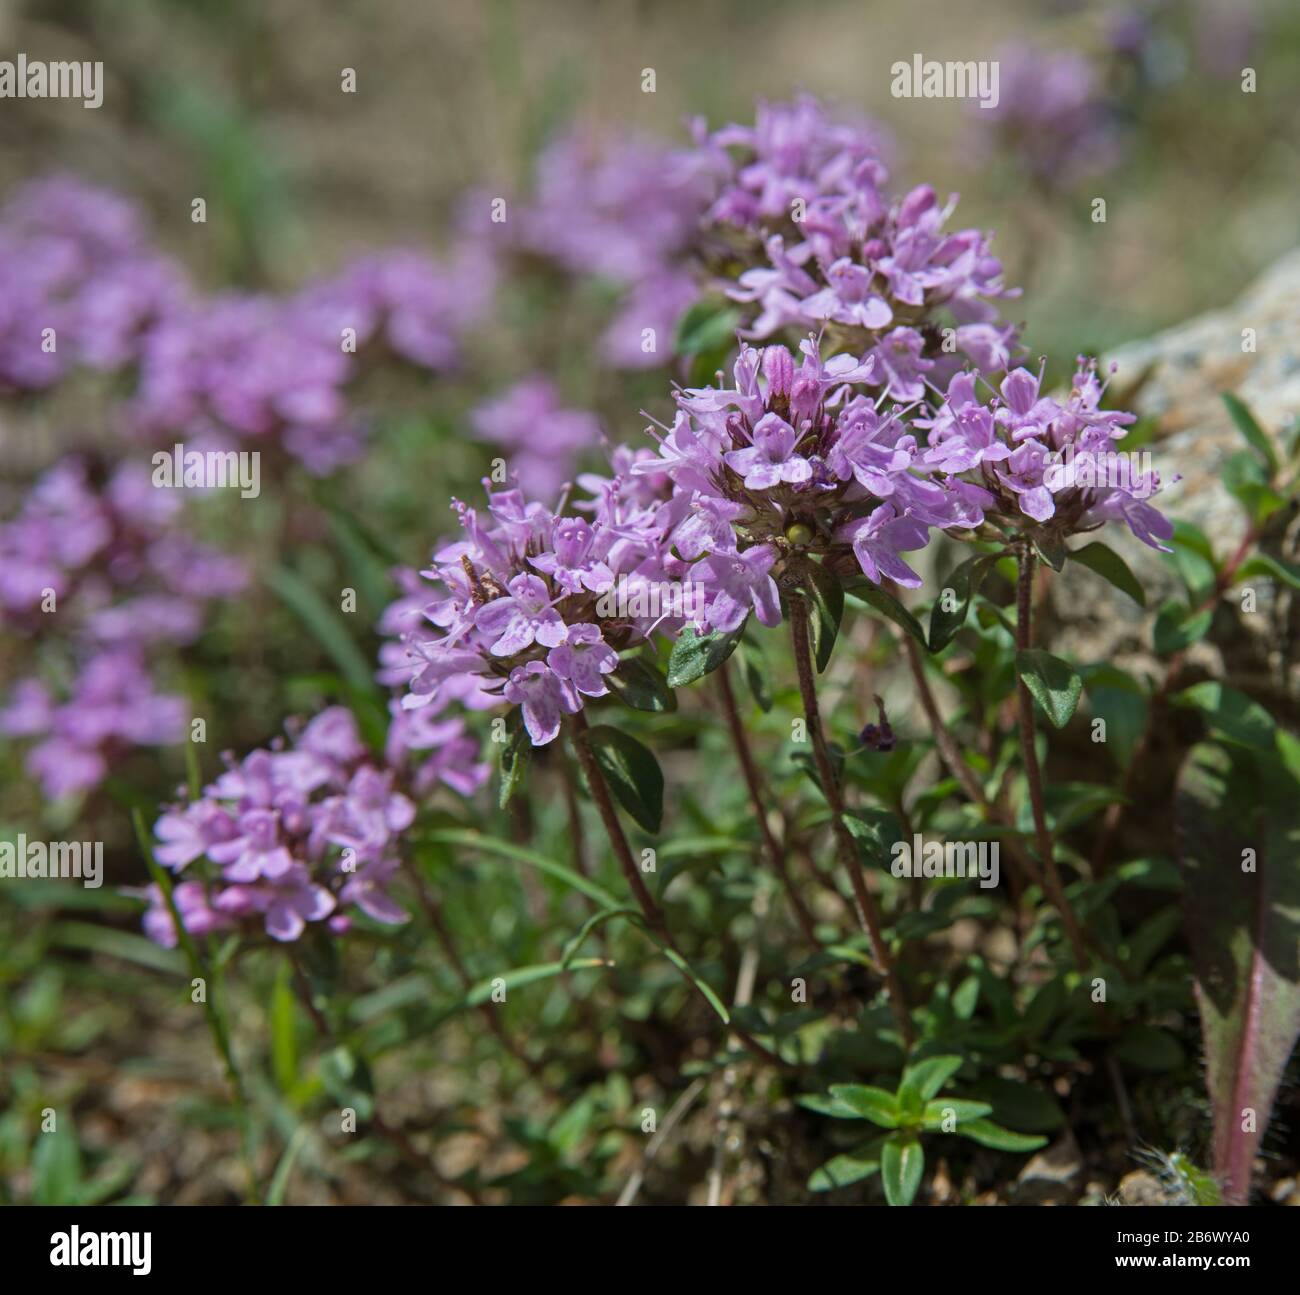 These summer flowers are thyme. Thyme is any of several species of culinary and medicinal herbs of the genus Thymus, most commonly Thymus vulgaris. Stock Photo